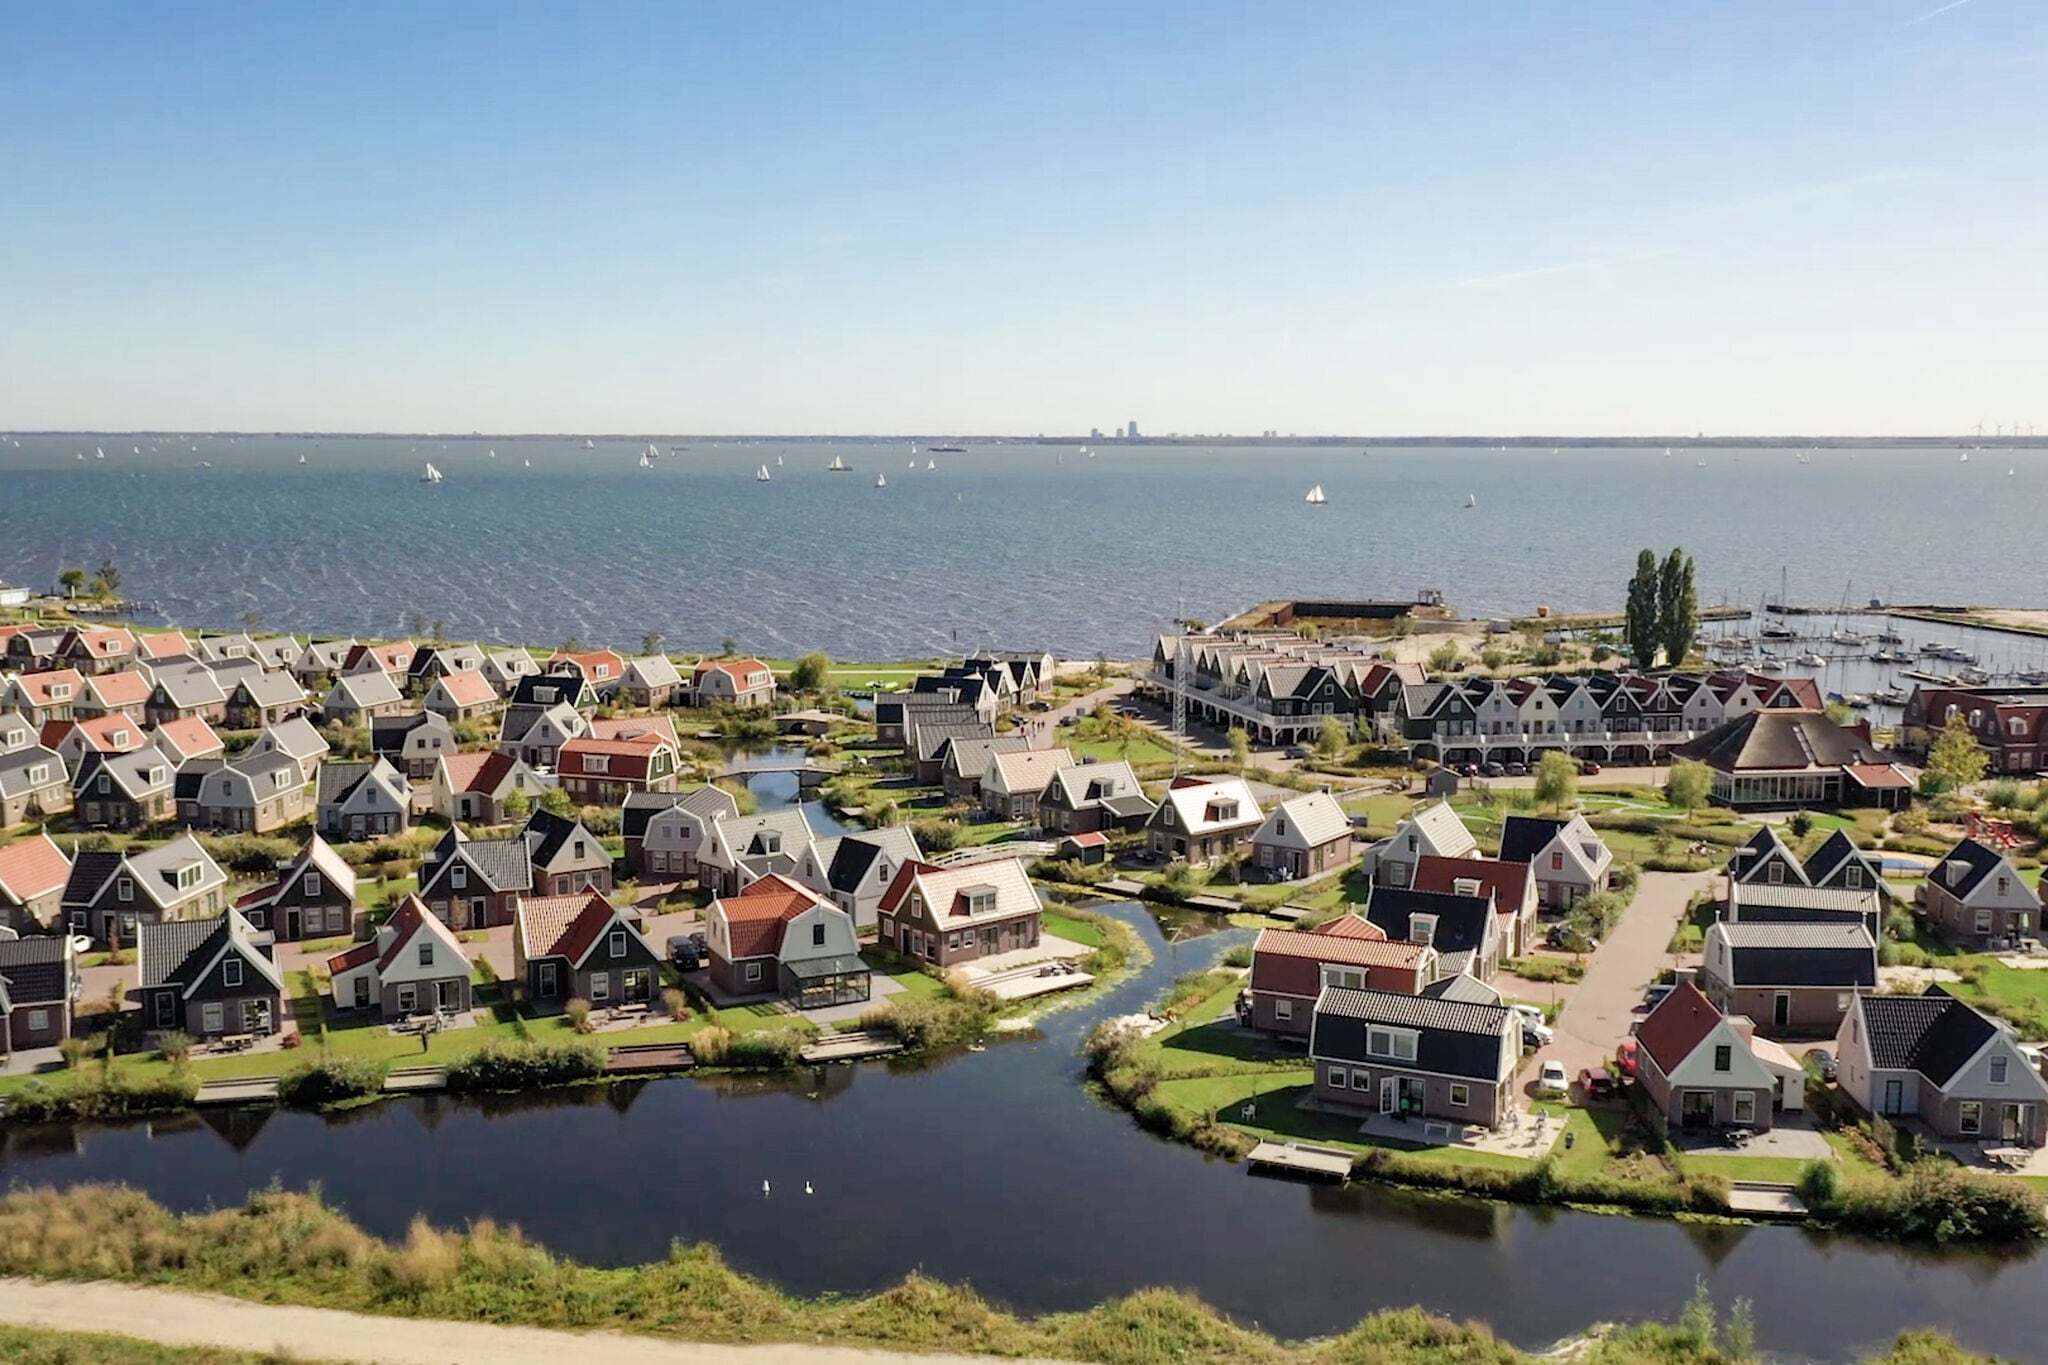 Spacious holiday home on the Markermeer, near Amsterdam